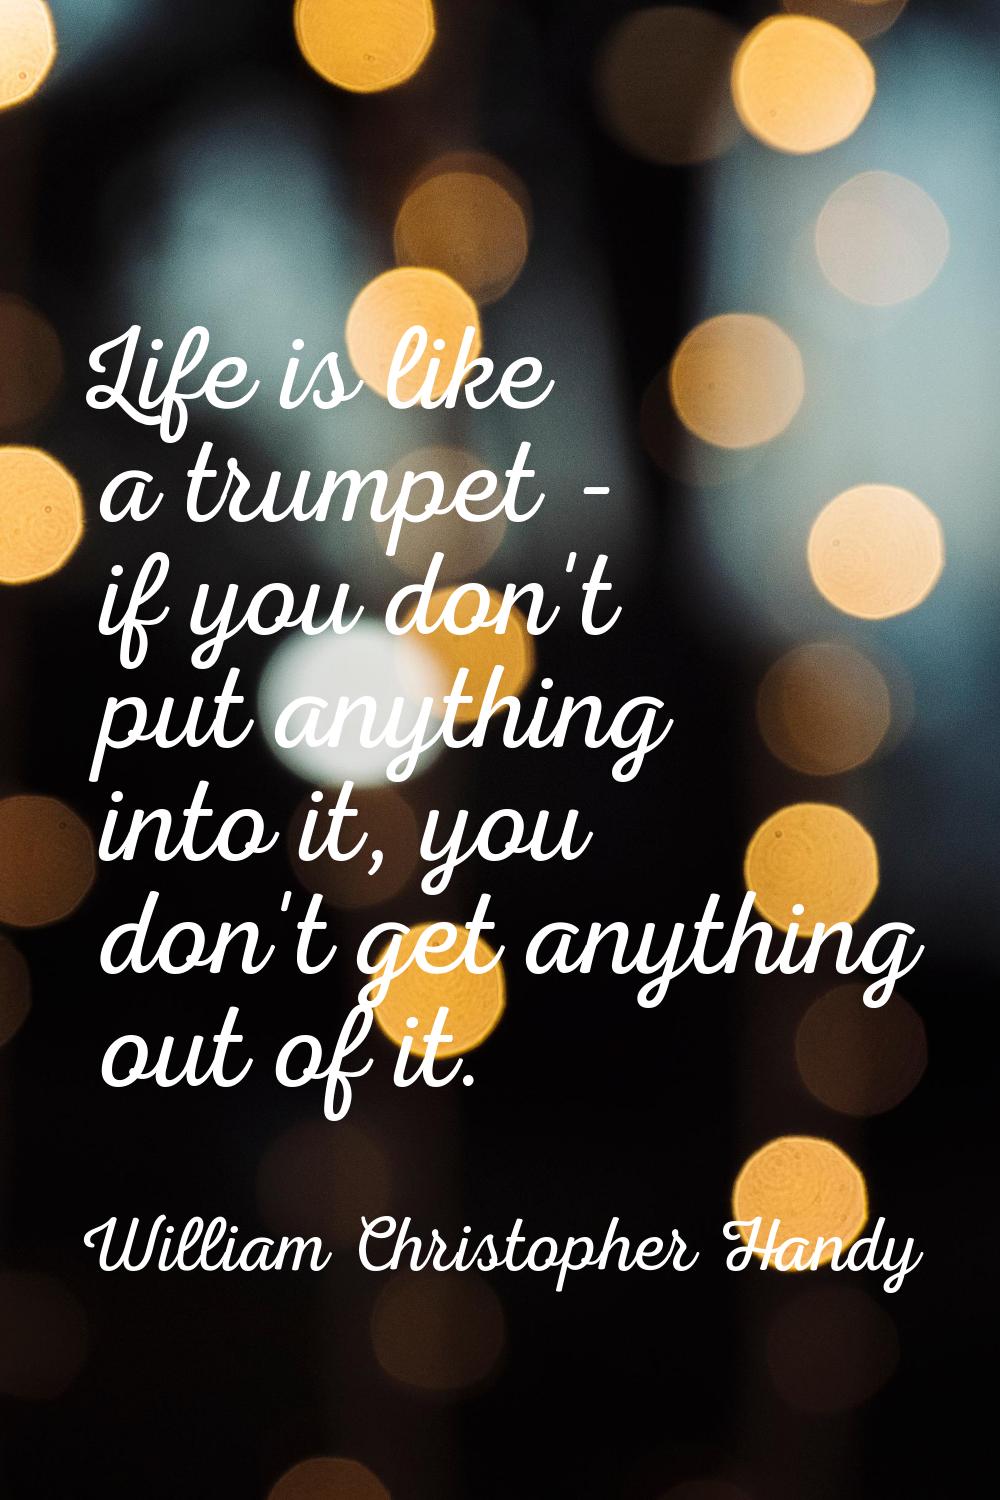 Life is like a trumpet - if you don't put anything into it, you don't get anything out of it.